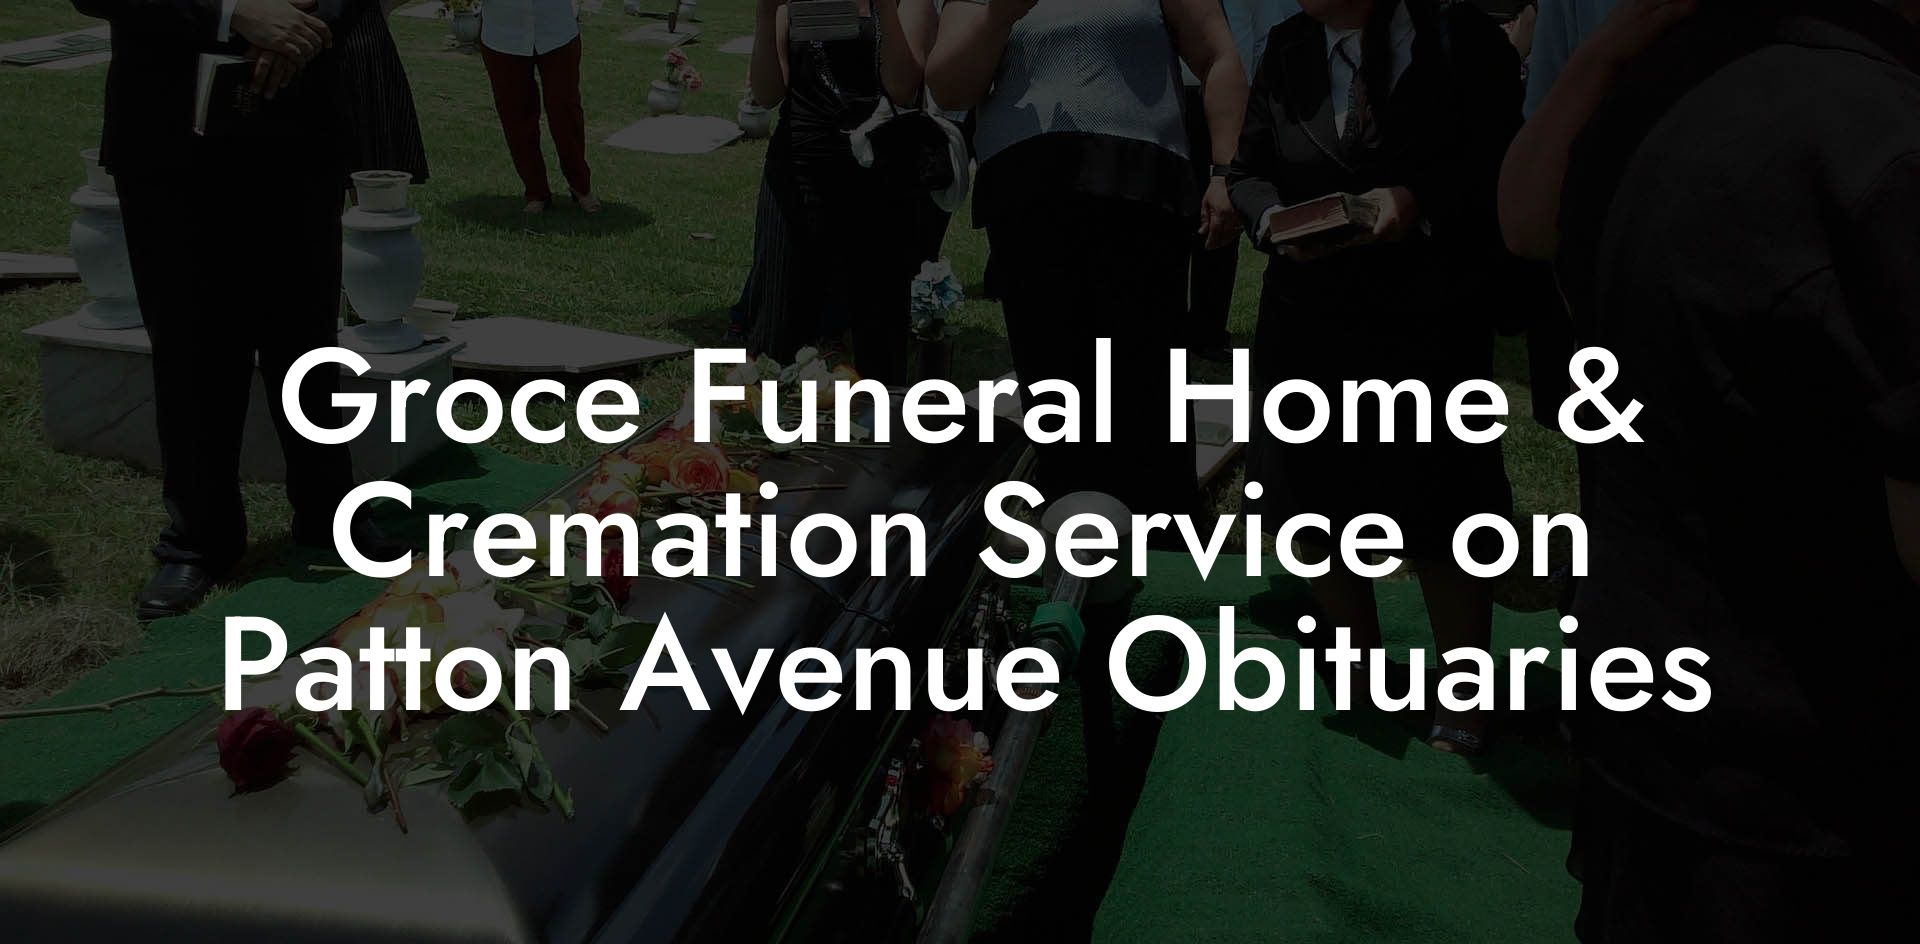 Groce Funeral Home & Cremation Service on Patton Avenue Obituaries